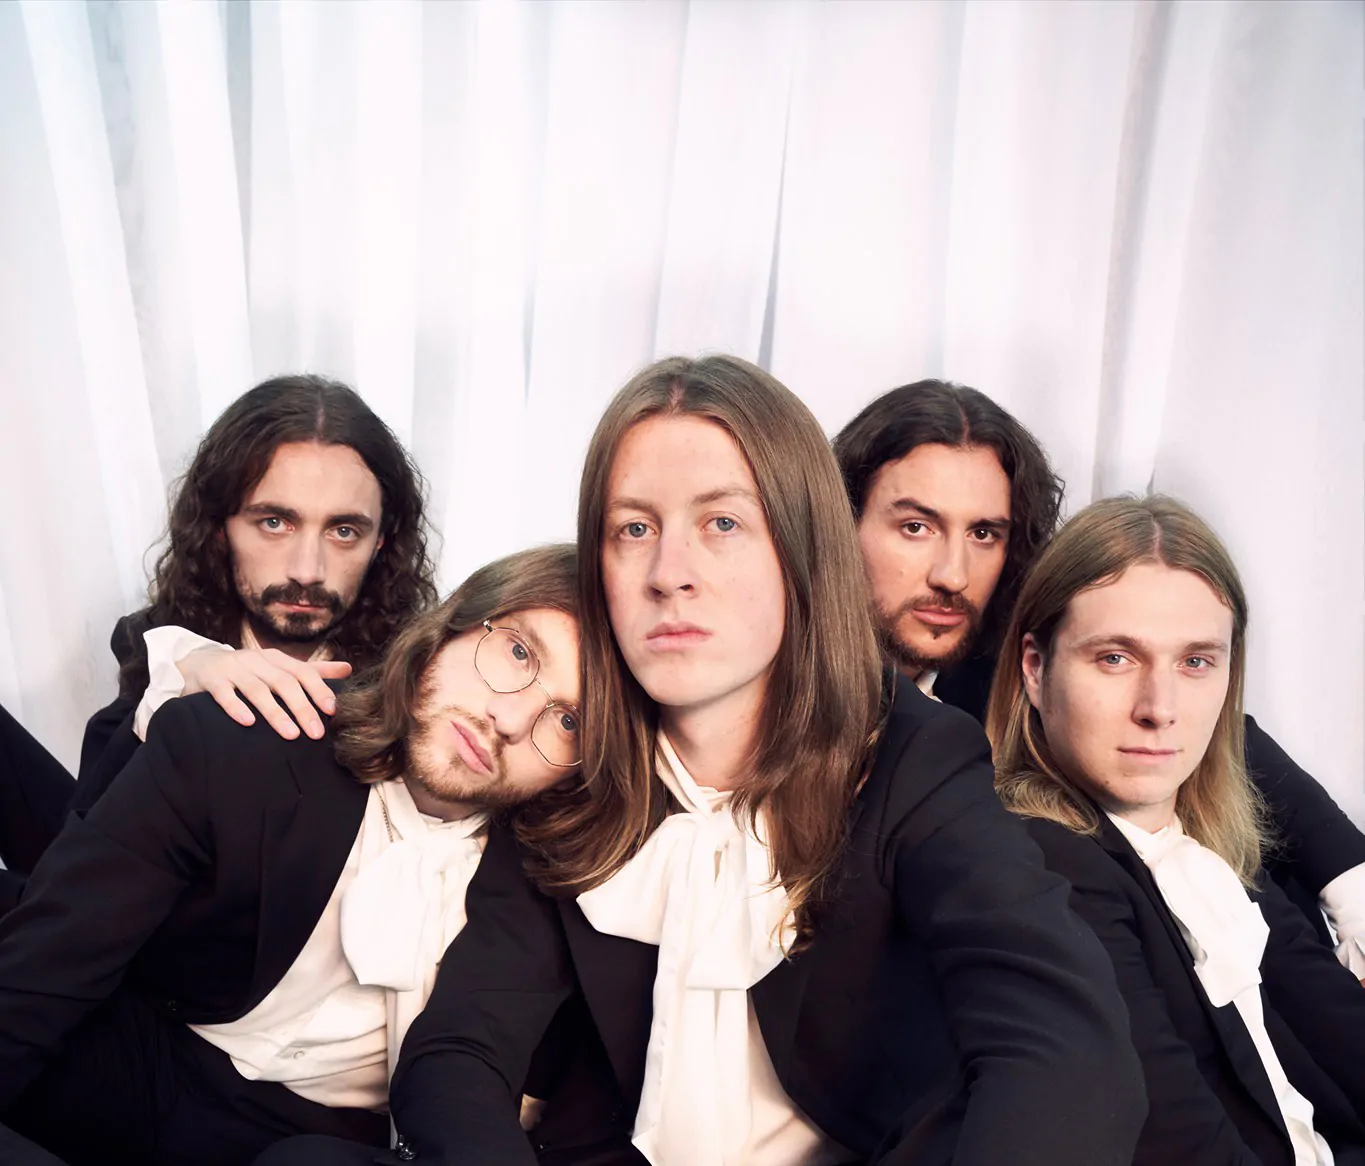 BLOSSOMS share video for brand new single ‘Care For’ – Watch Now